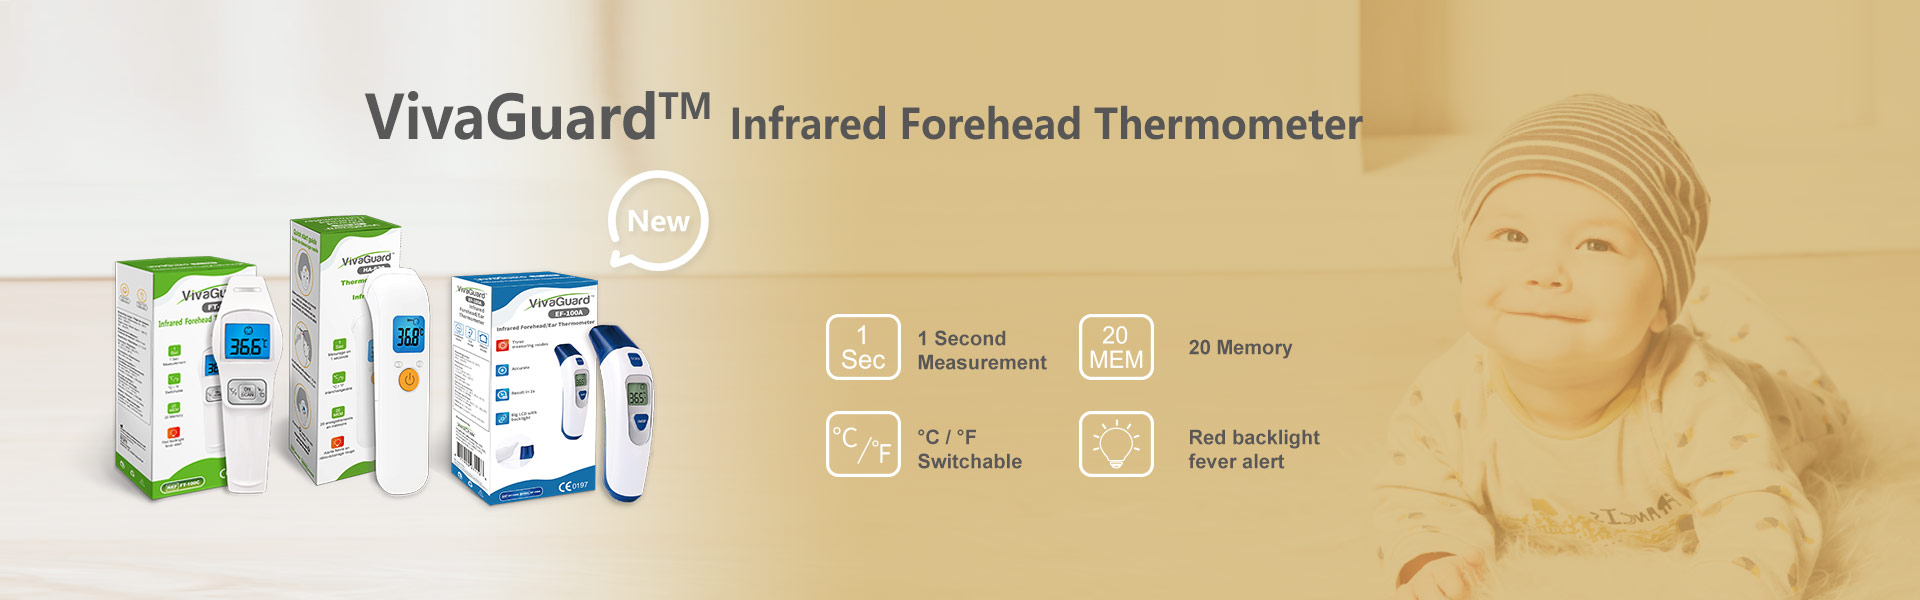 VivaGuard Digital Thermometers give accurate readings on easy-to-read digital screen within few seconds. A perfect family assistant for temperature monitoring.